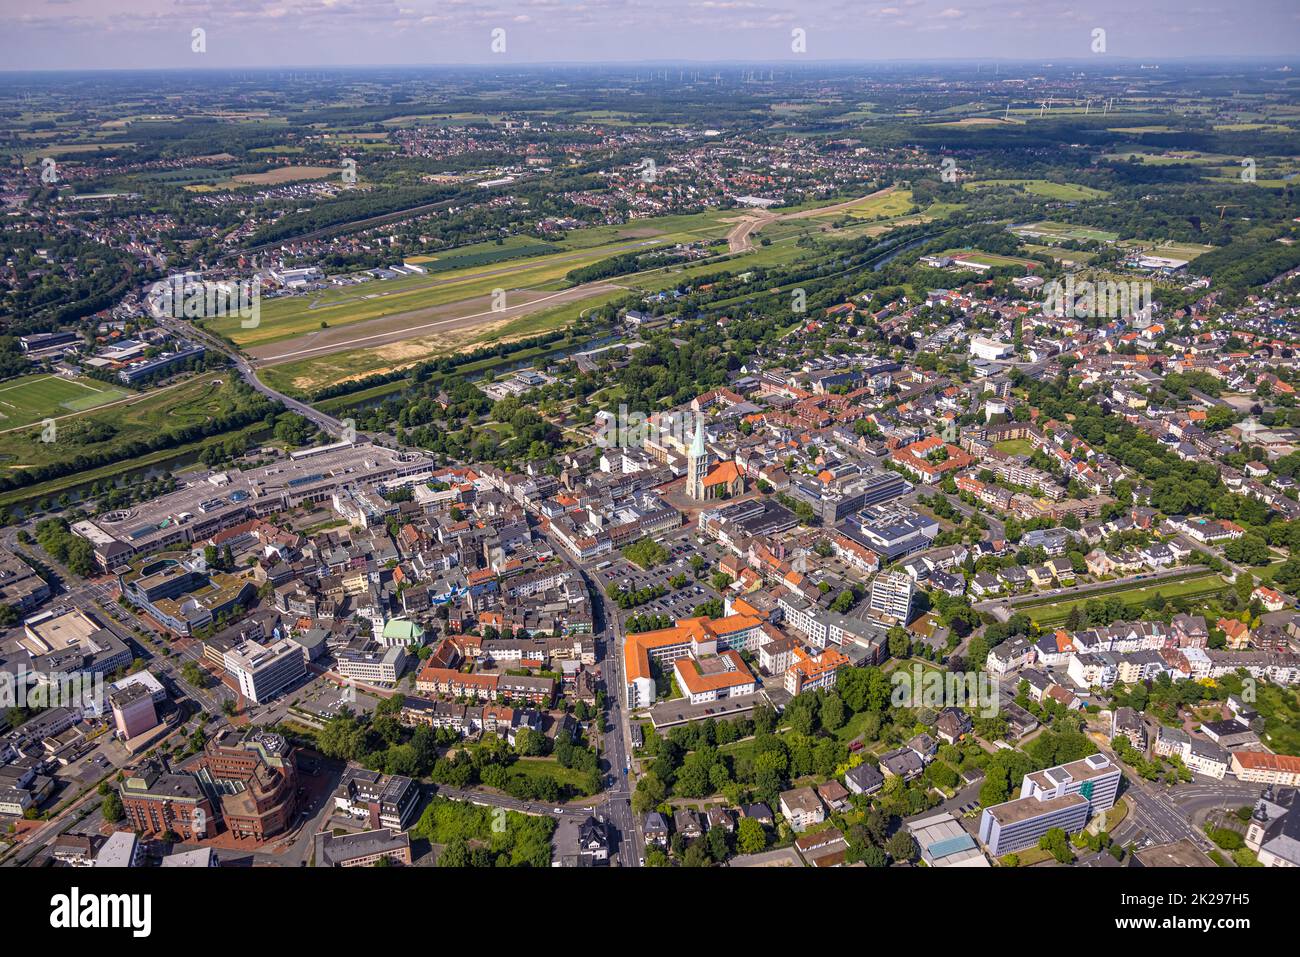 Aerial view, water sports center at Adenauerallee as well as visual axis with Nordringpark and evang. Pauluskirche, Allee-Center, Mitte, Hamm, Ruhrgeb Stock Photo